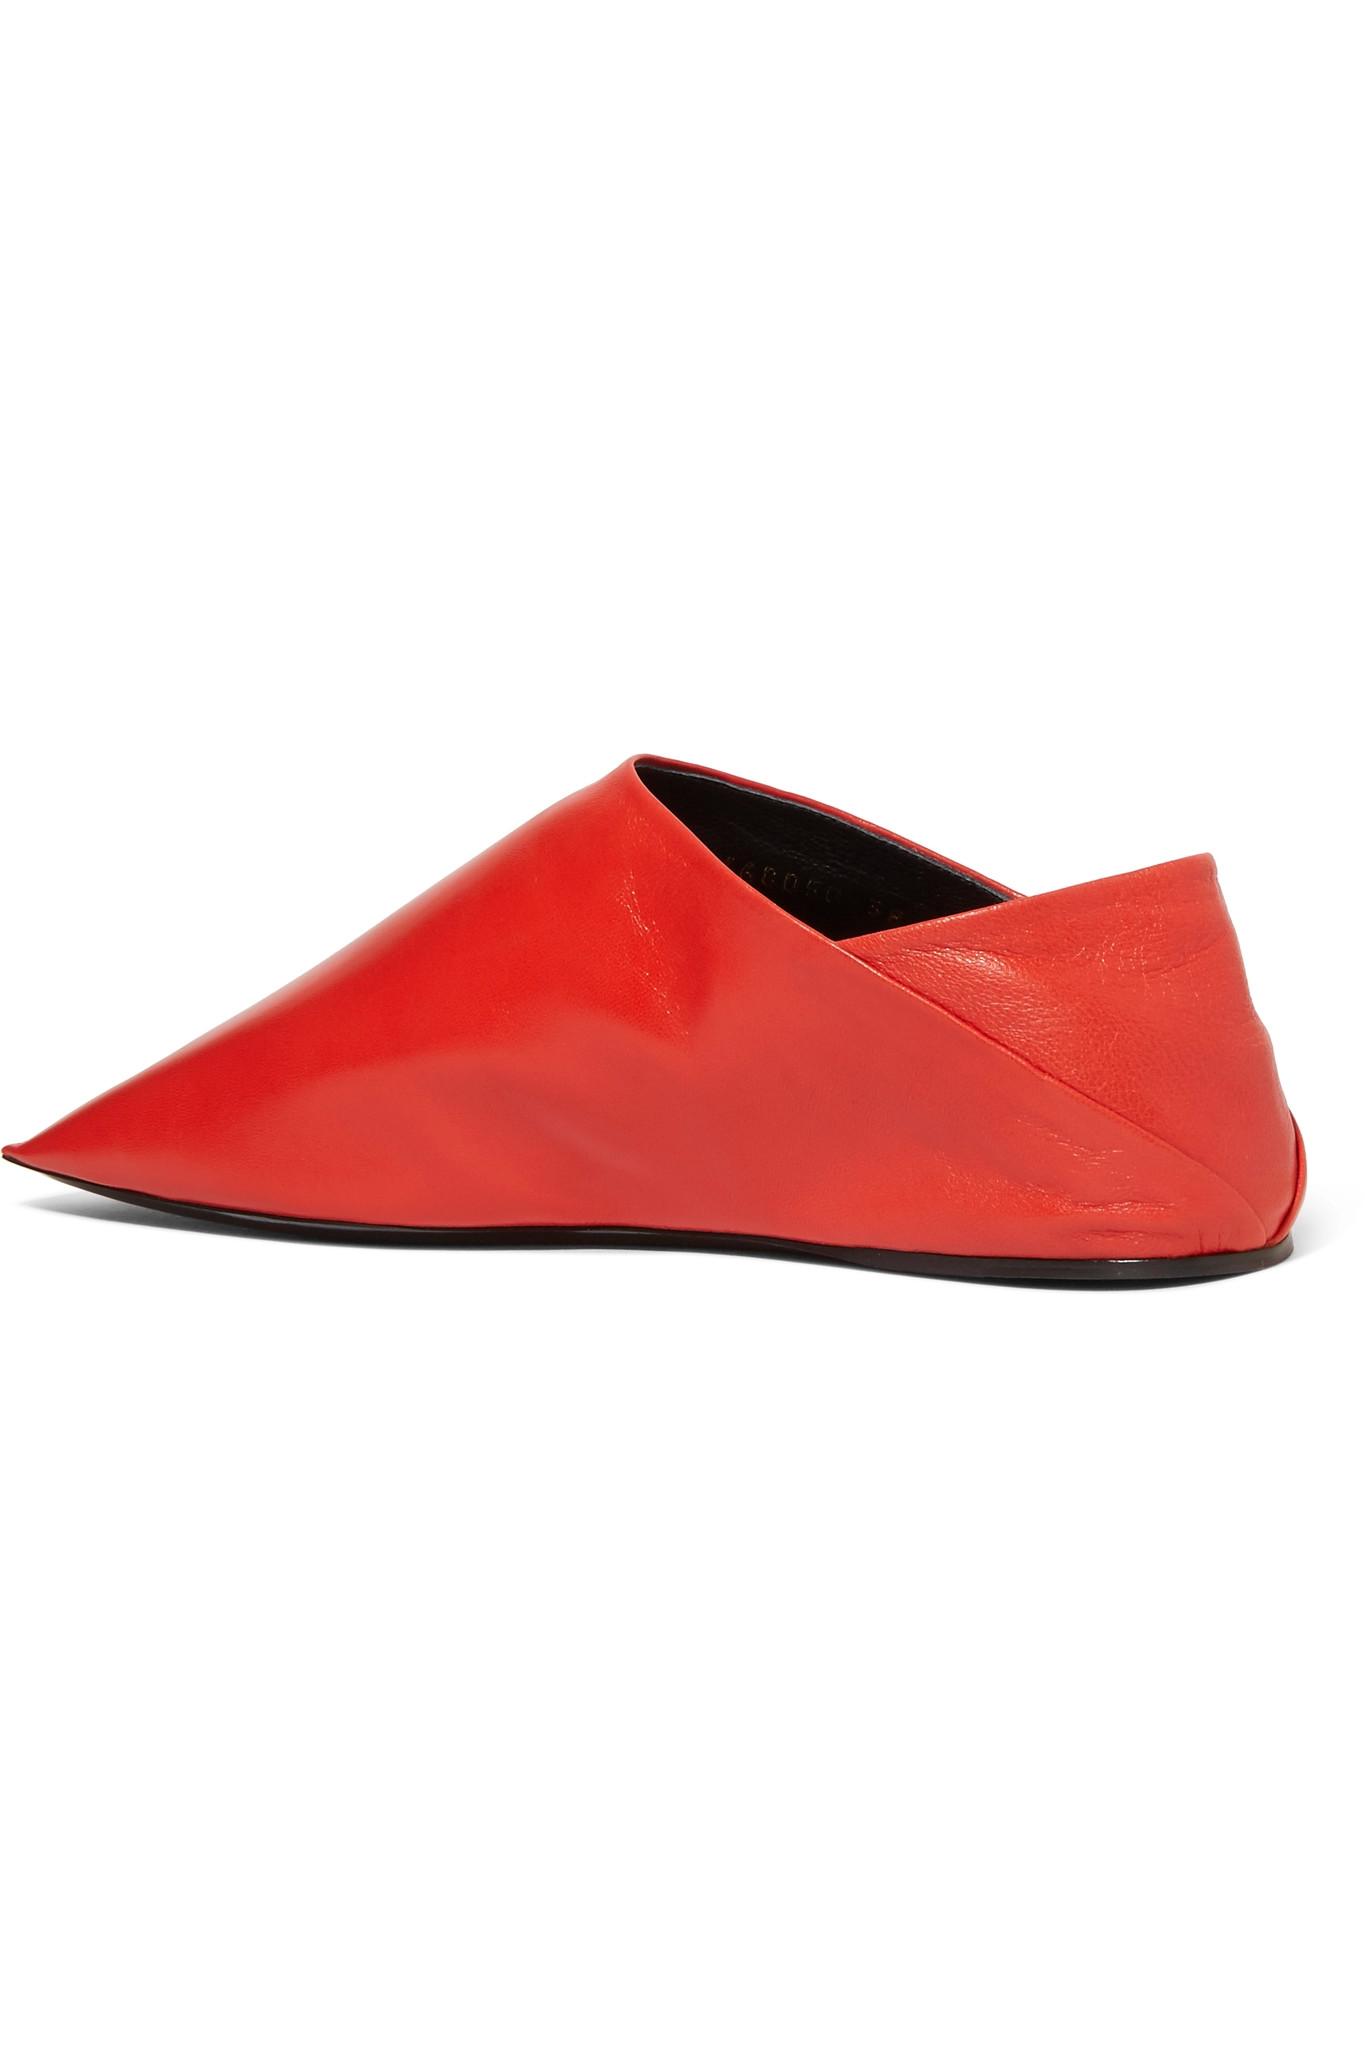 Balenciaga Leather Slippers in Red - Lyst